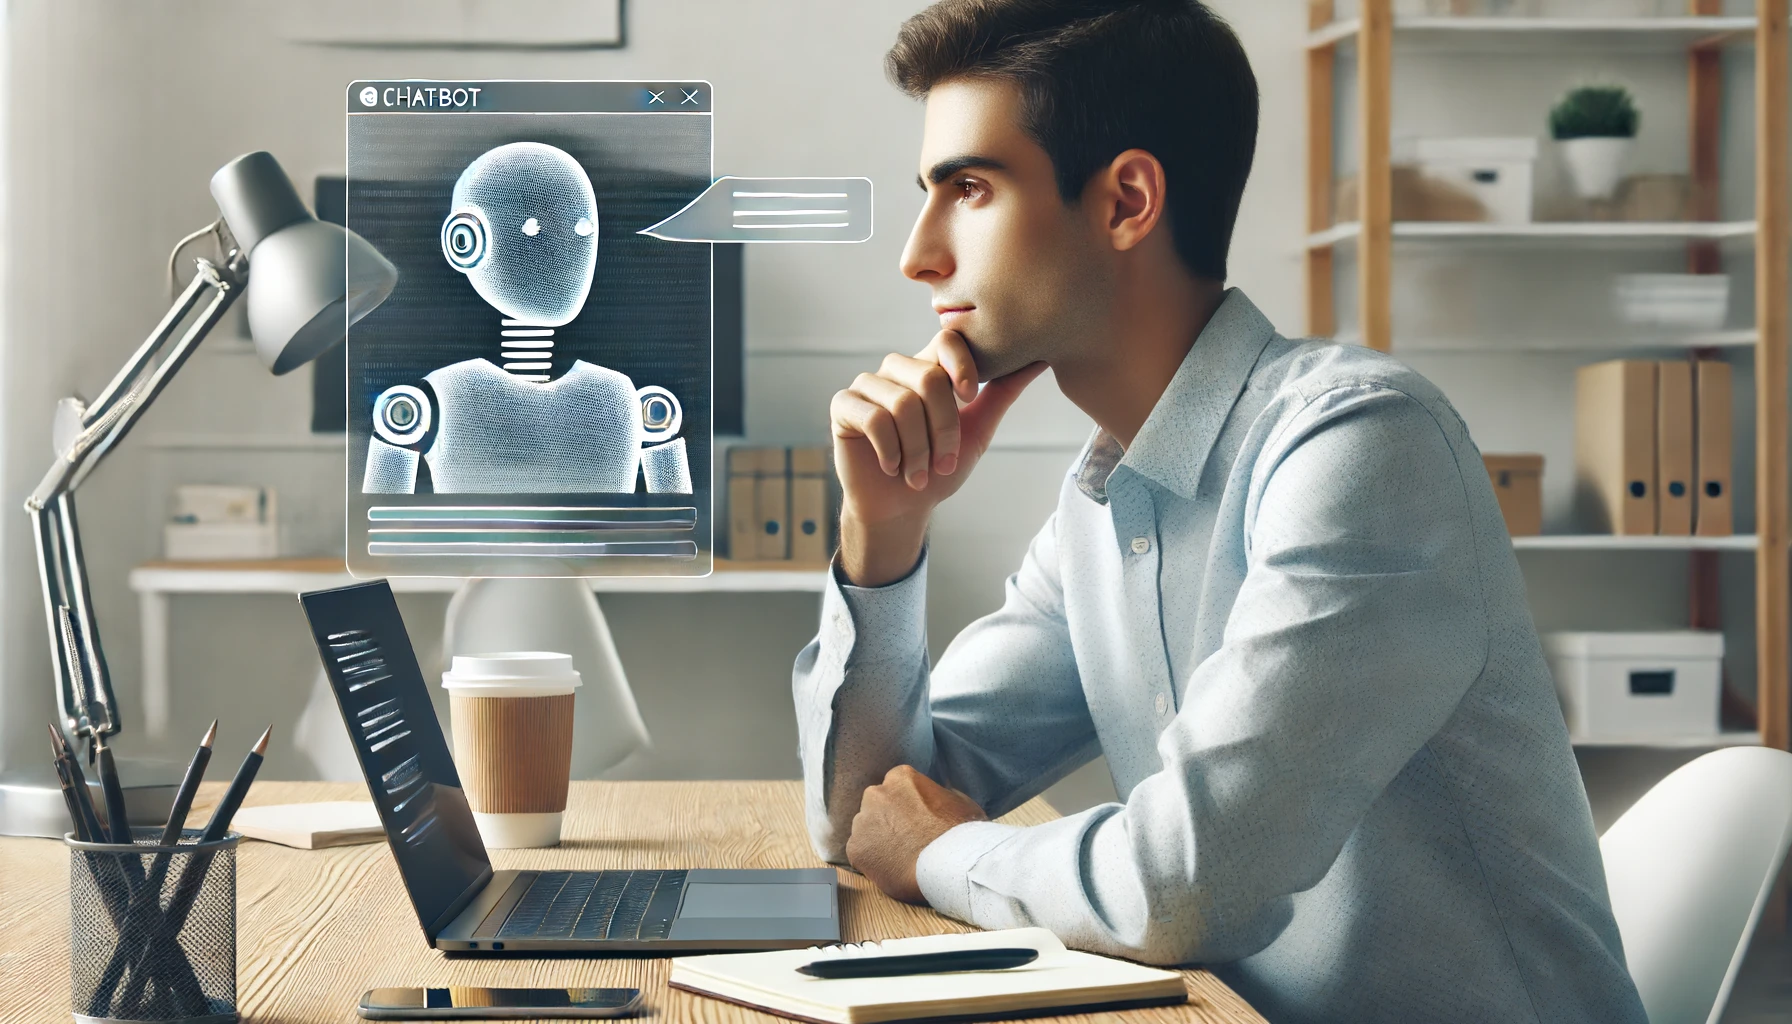 A person sitting at a desk, looking pensively at a laptop screen with a chatbot interface visible, symbolizing the role of AI assistants.